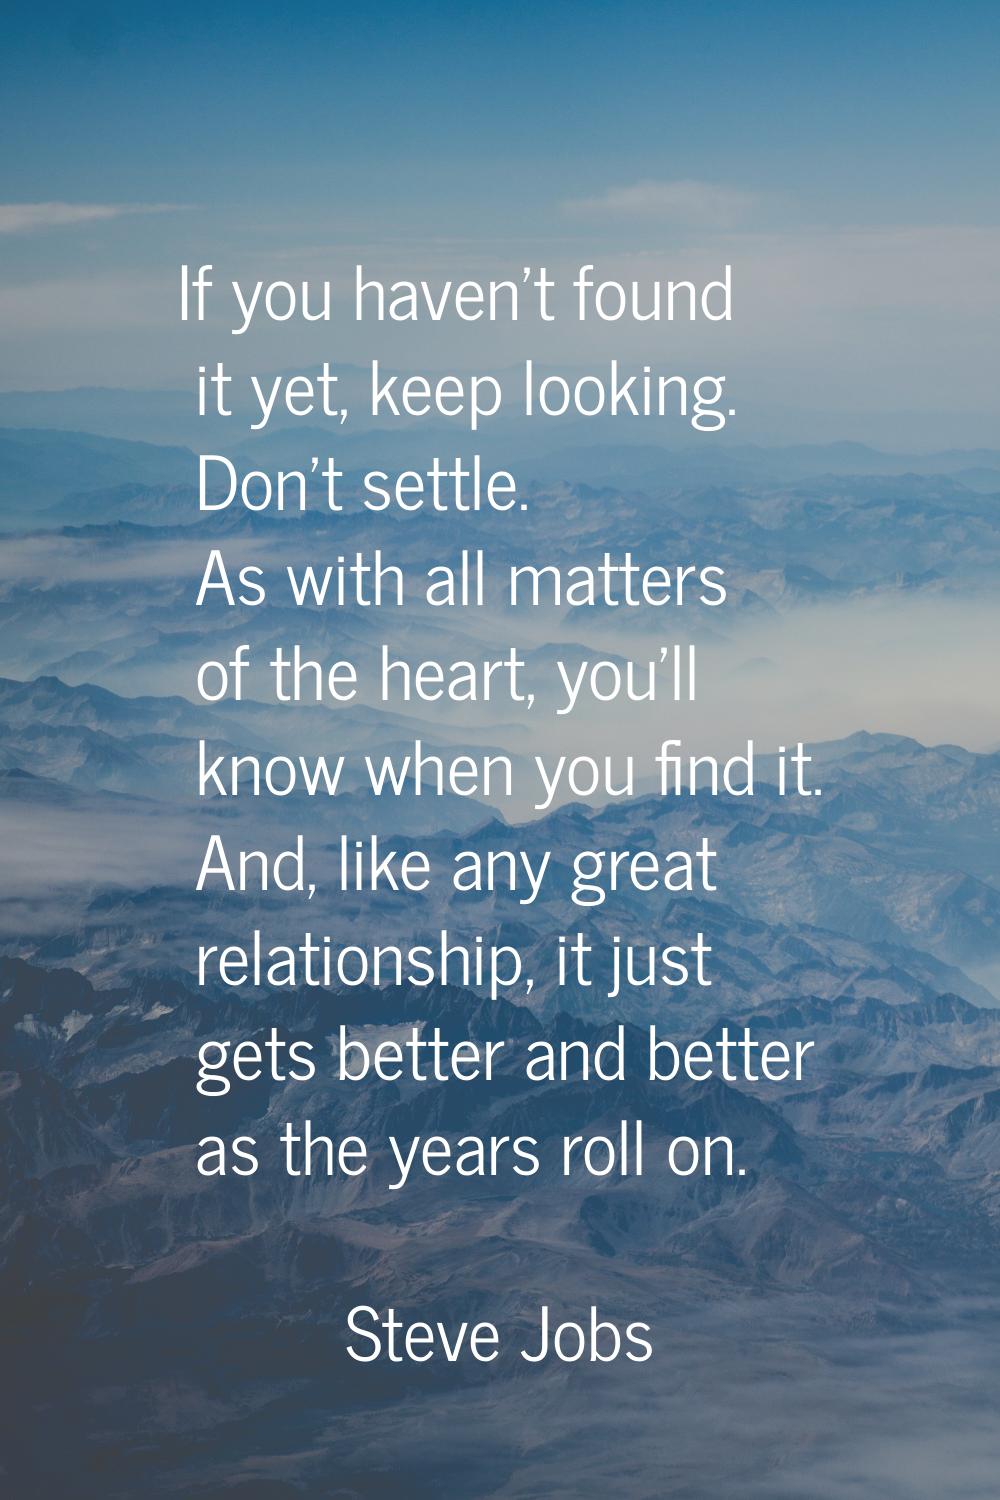 If you haven't found it yet, keep looking. Don't settle. As with all matters of the heart, you'll k